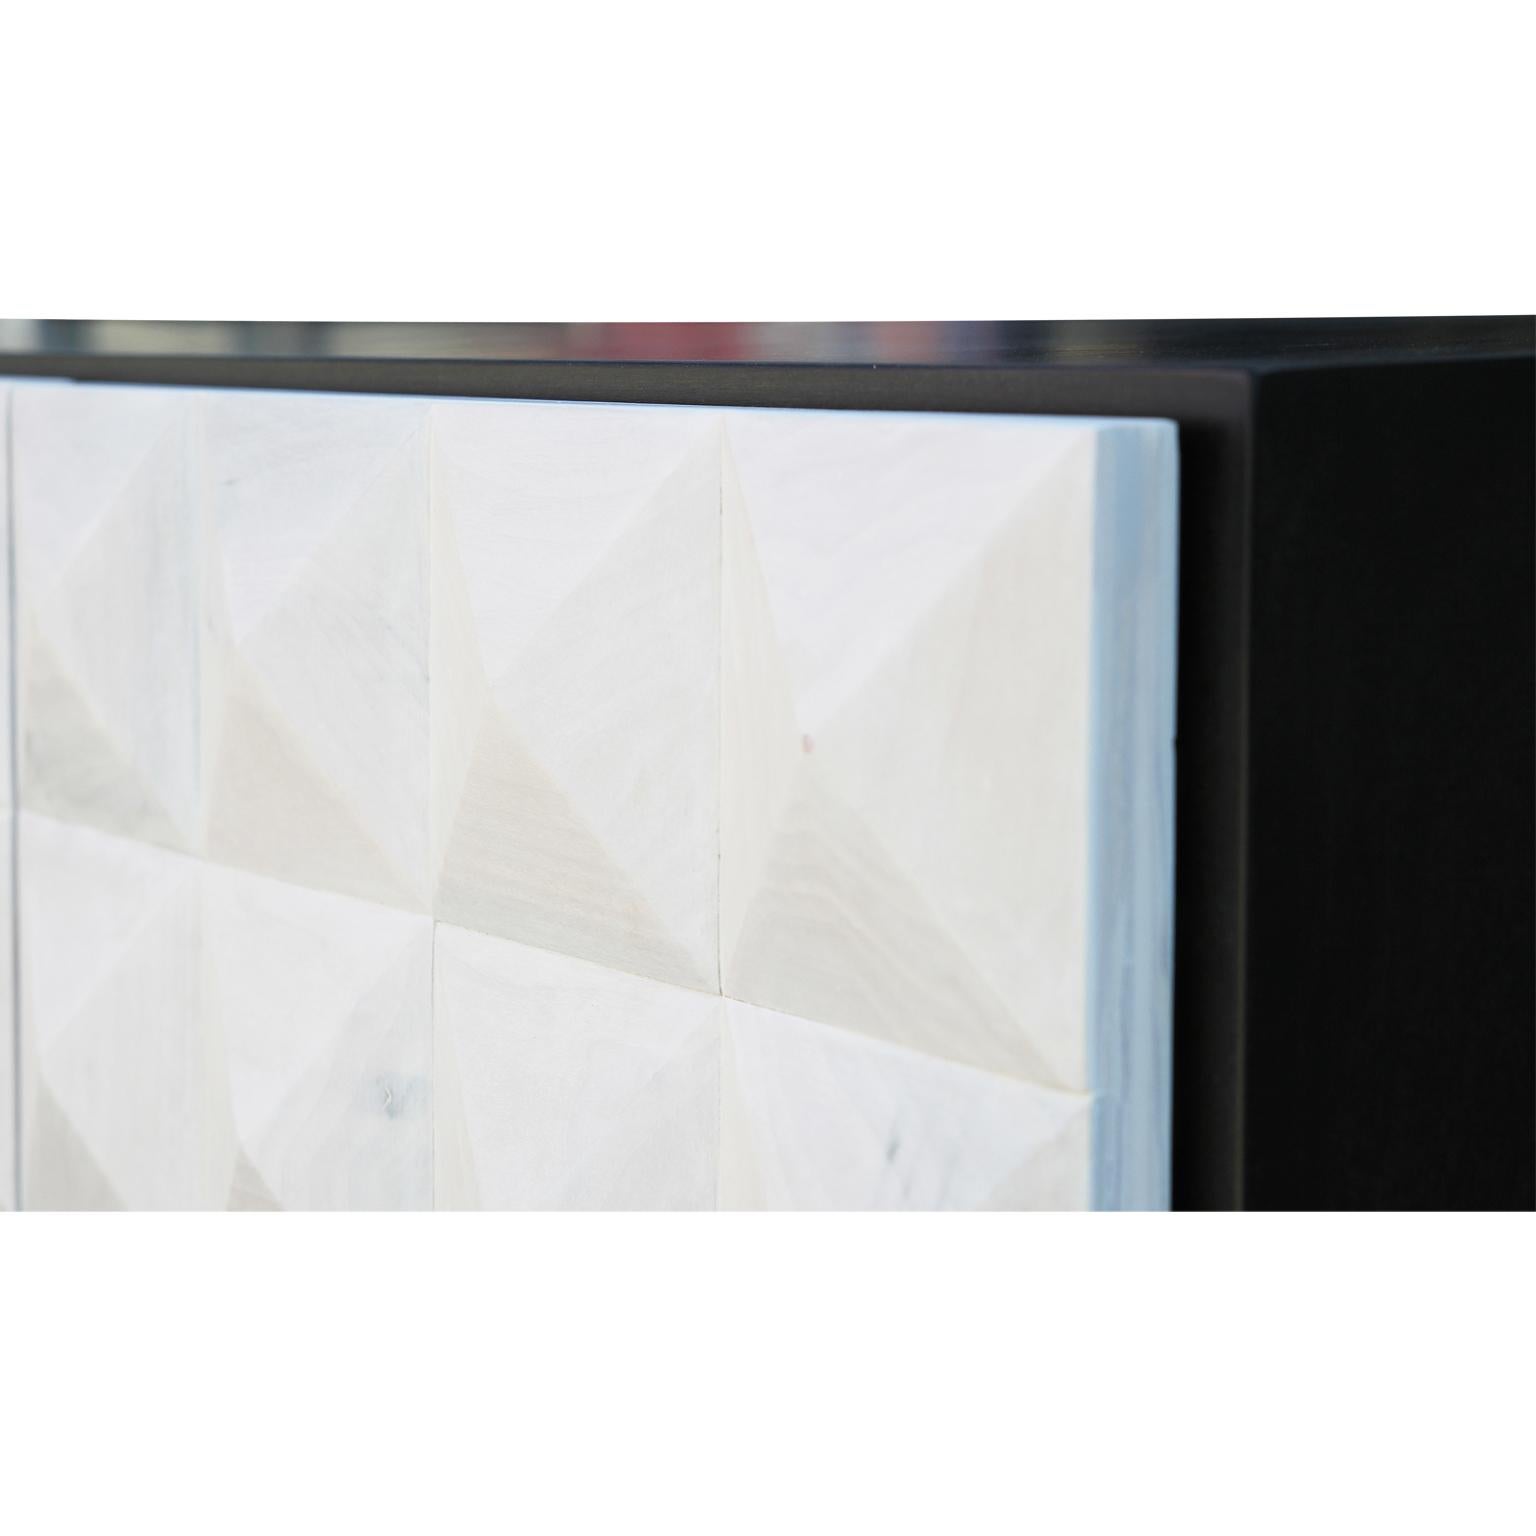 Brutalist custom designed handmade contemporary sideboard with white studded doors, natural fluted turned legs, and black stained base/body. The legs are smoothly turned, creating a fun and contemporary look. One of a kind!

- Oak construction
-